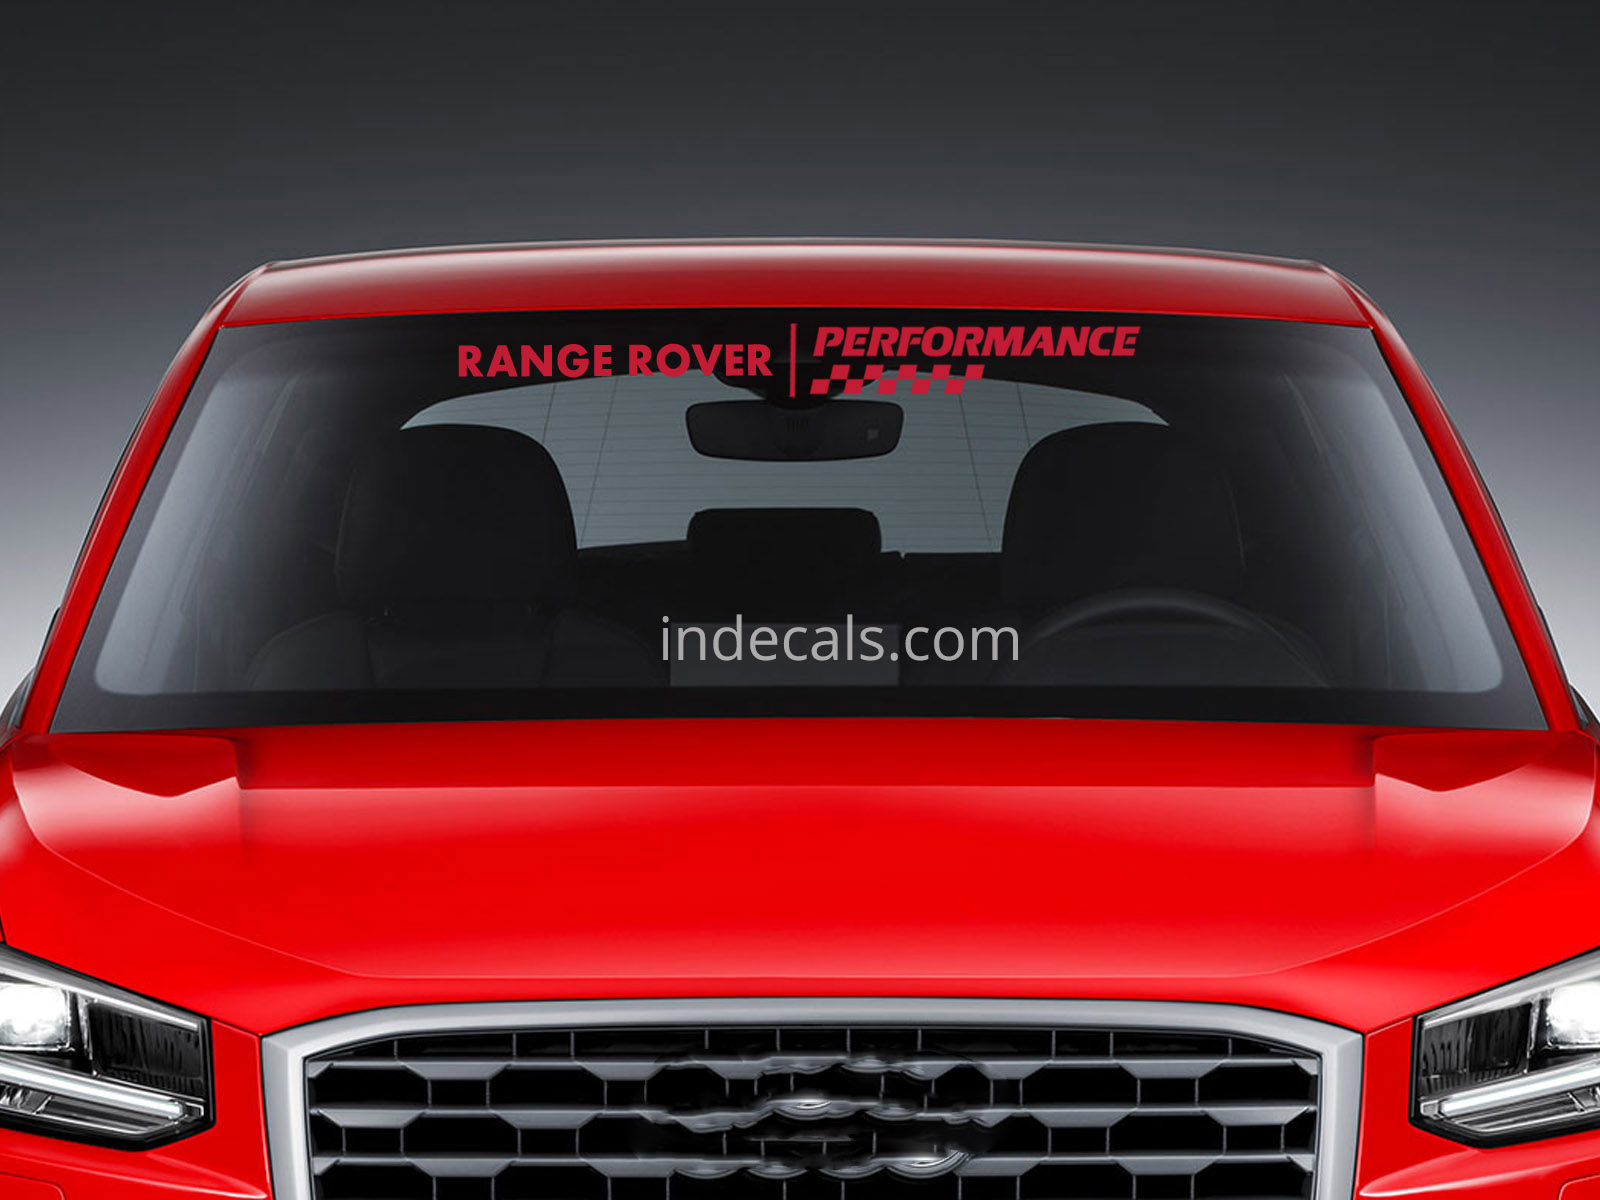 1 x Range Rover Performance Sticker for Windshield or Back Window - Red